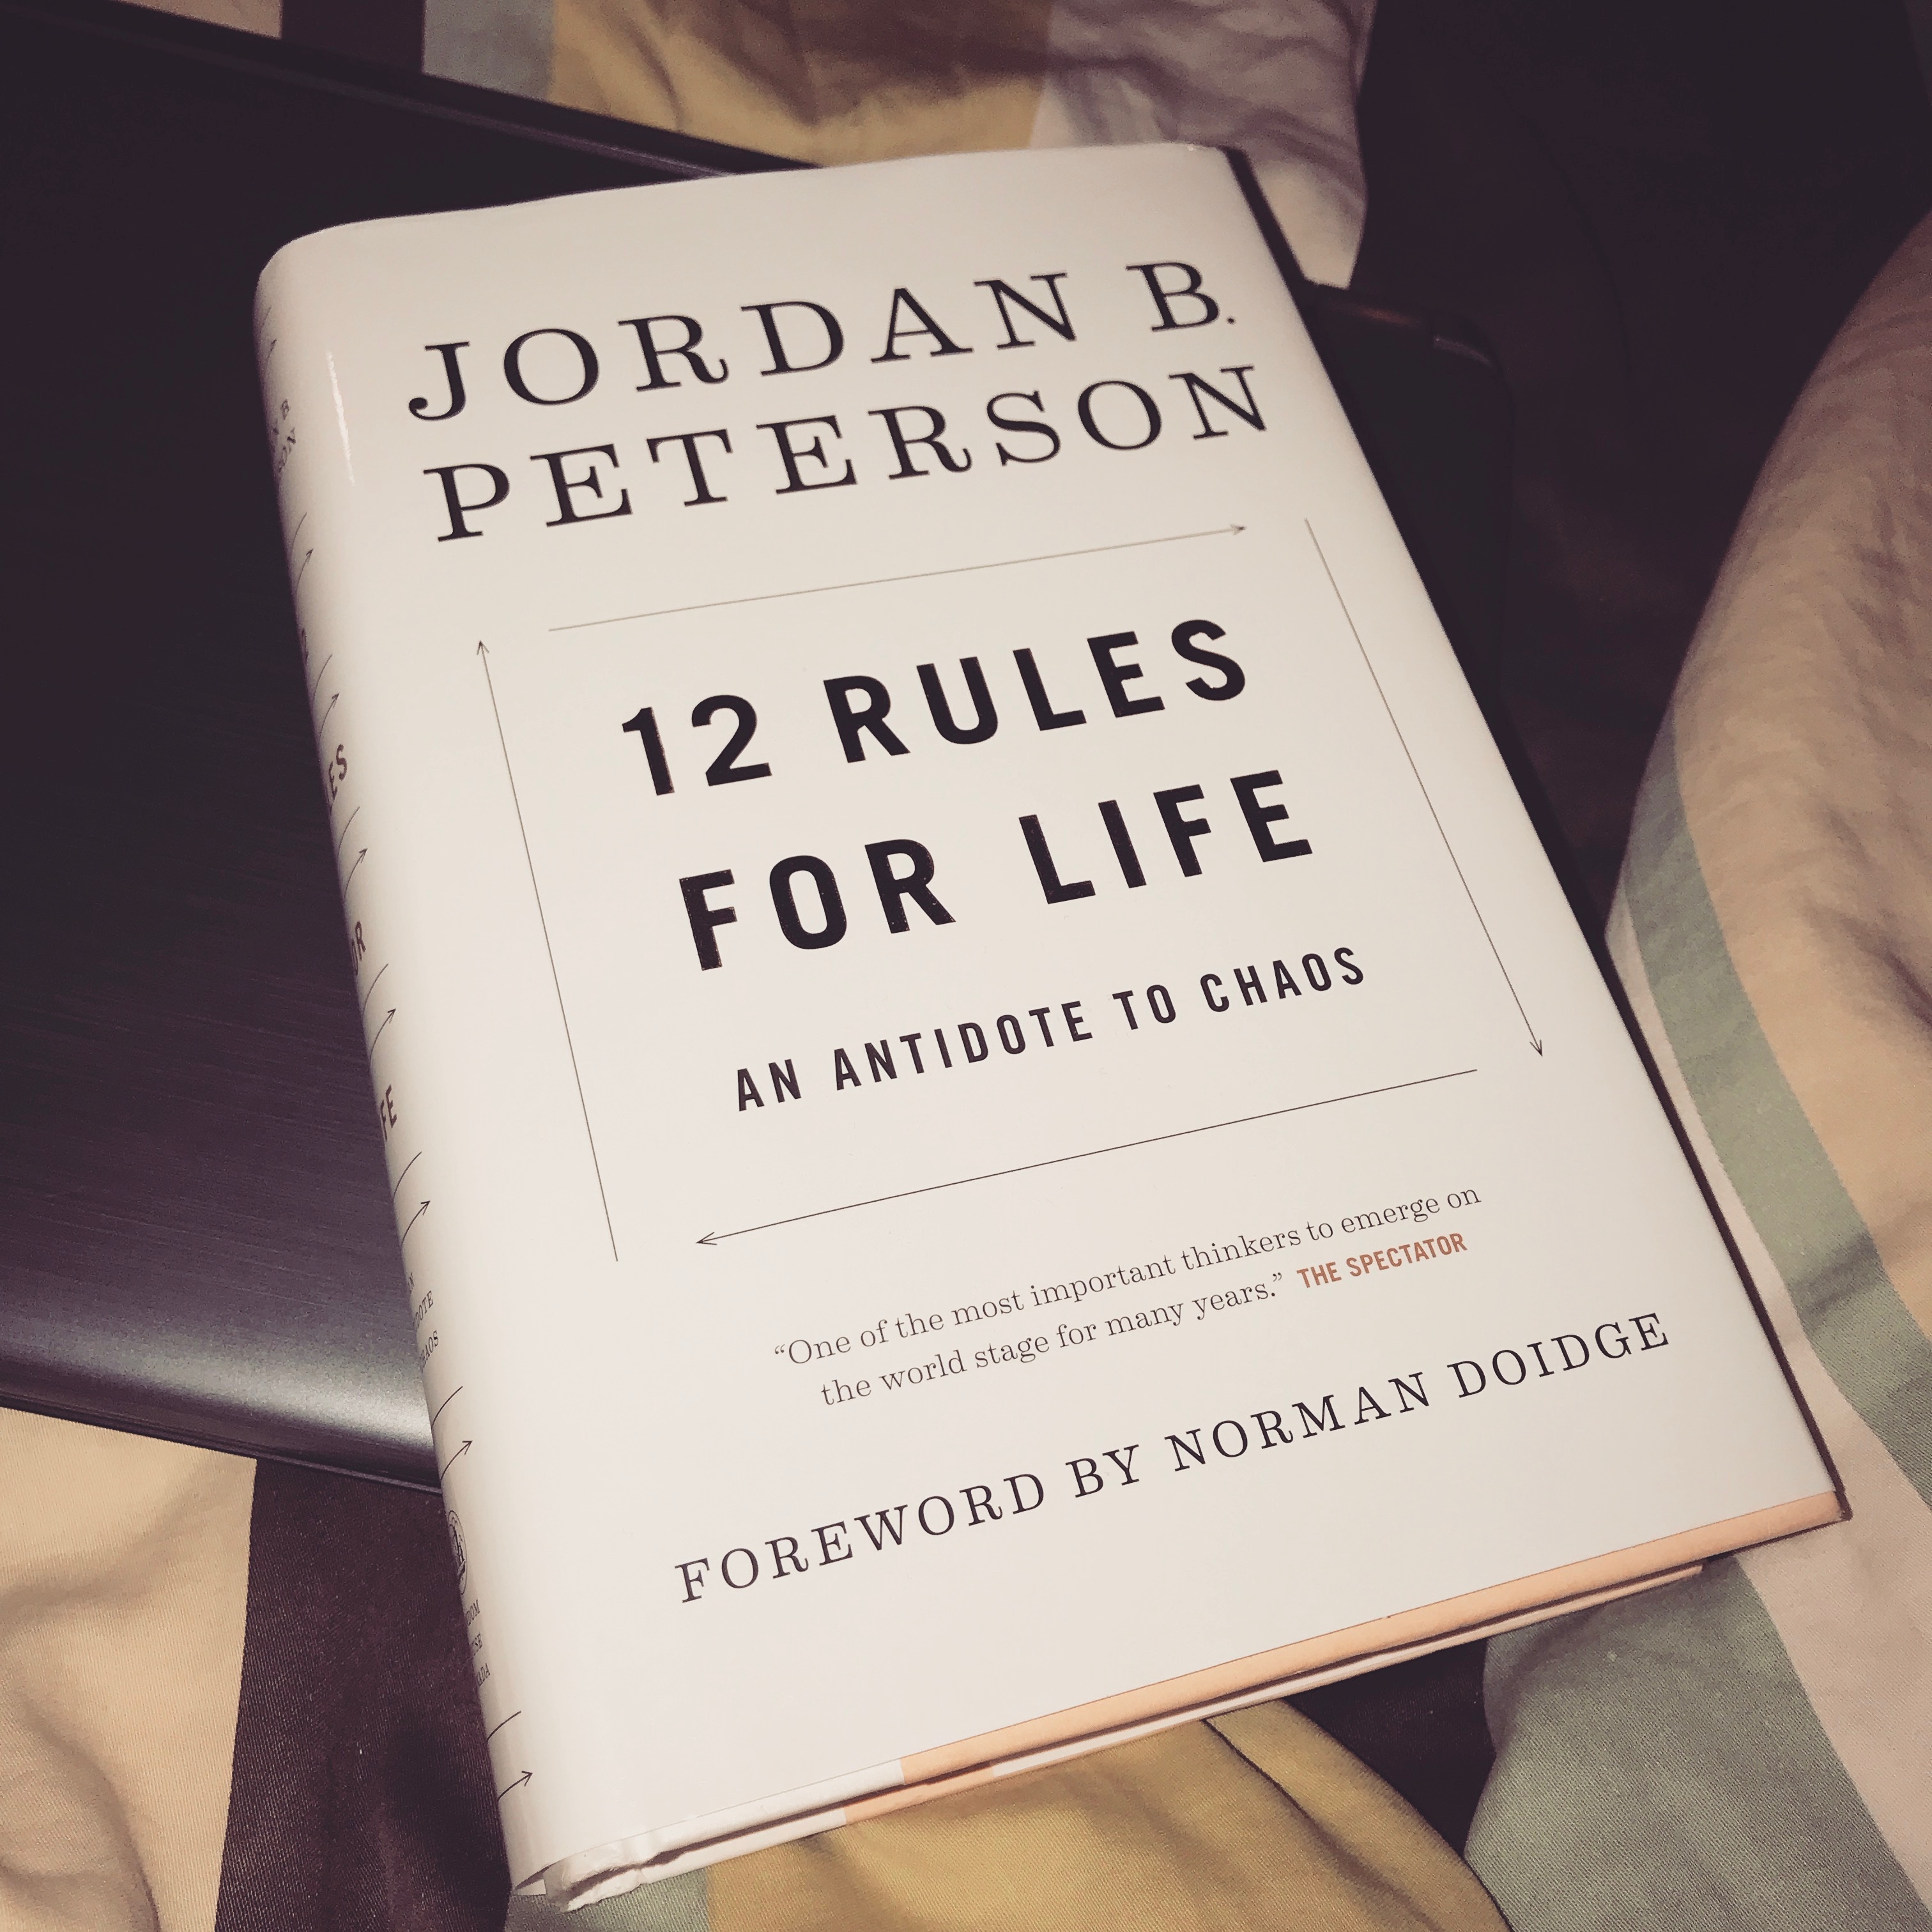 12 rules for life